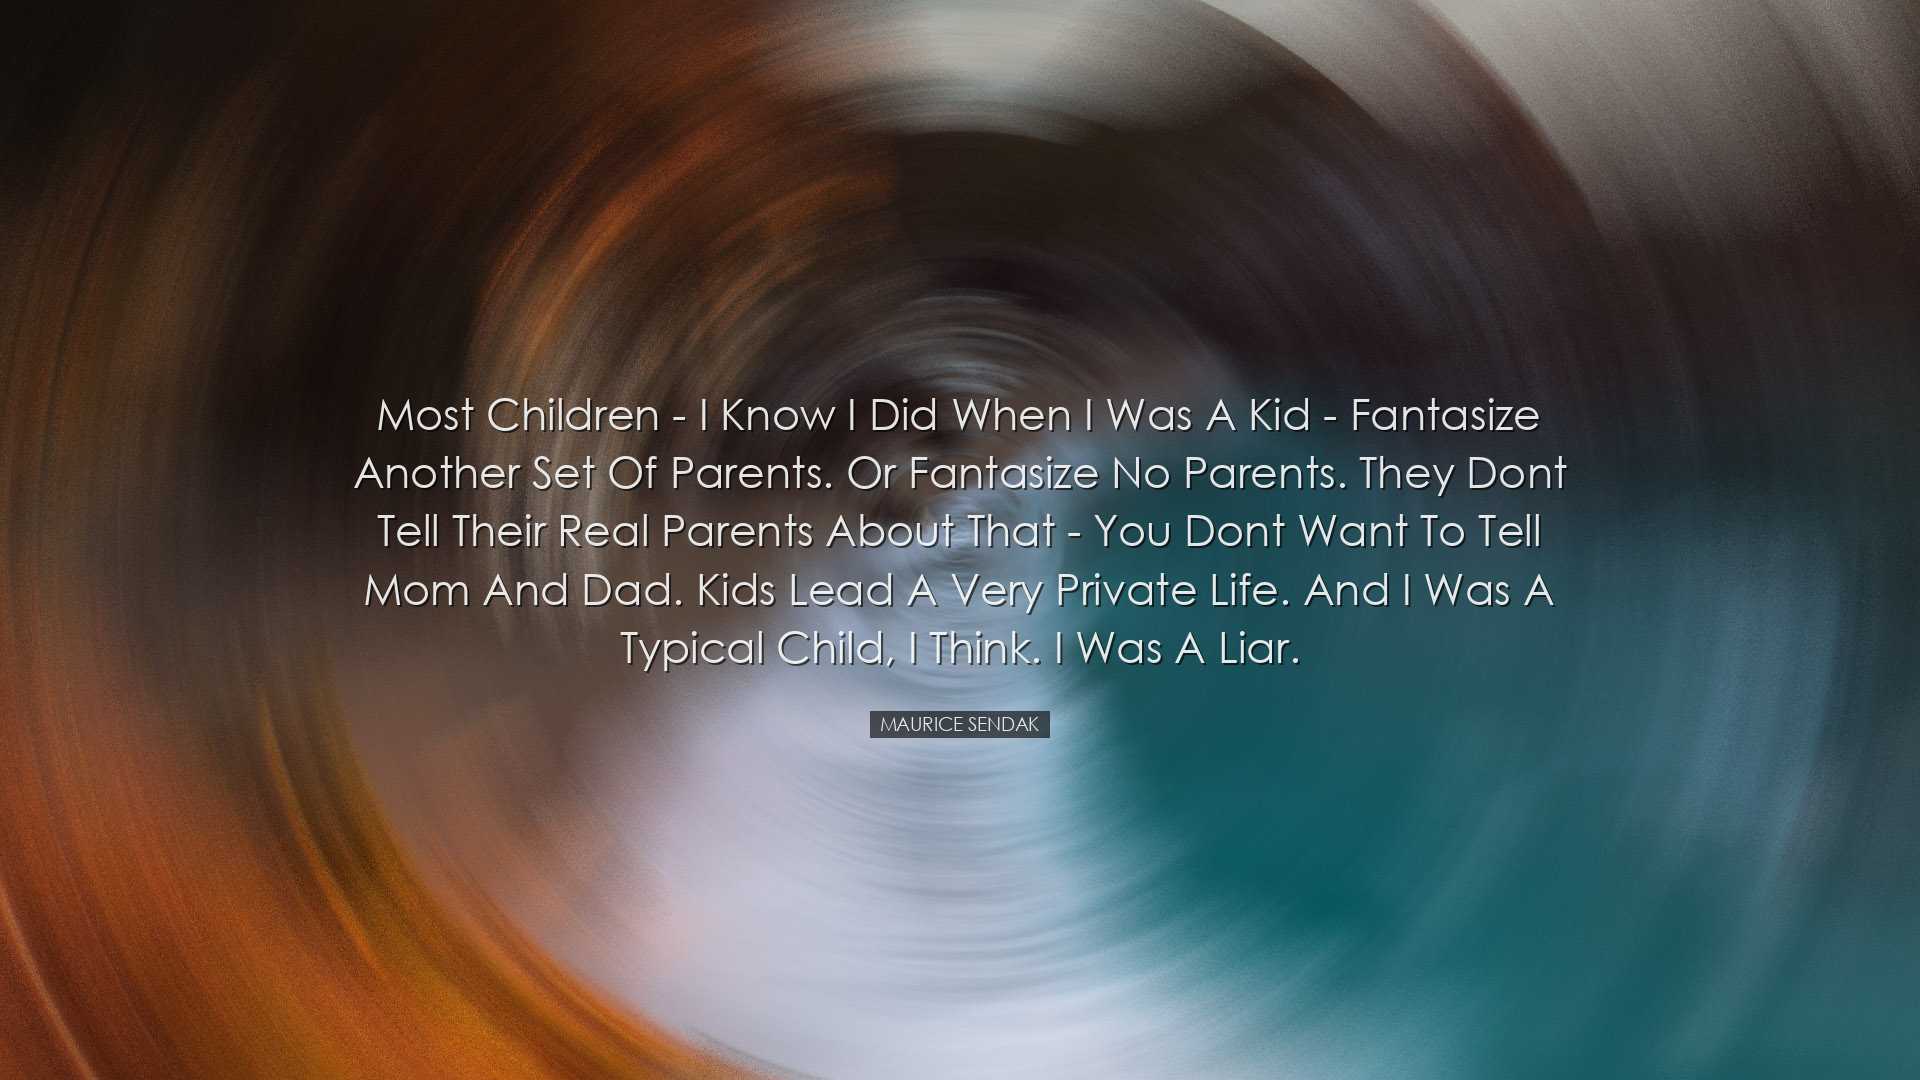 Most children - I know I did when I was a kid - fantasize another